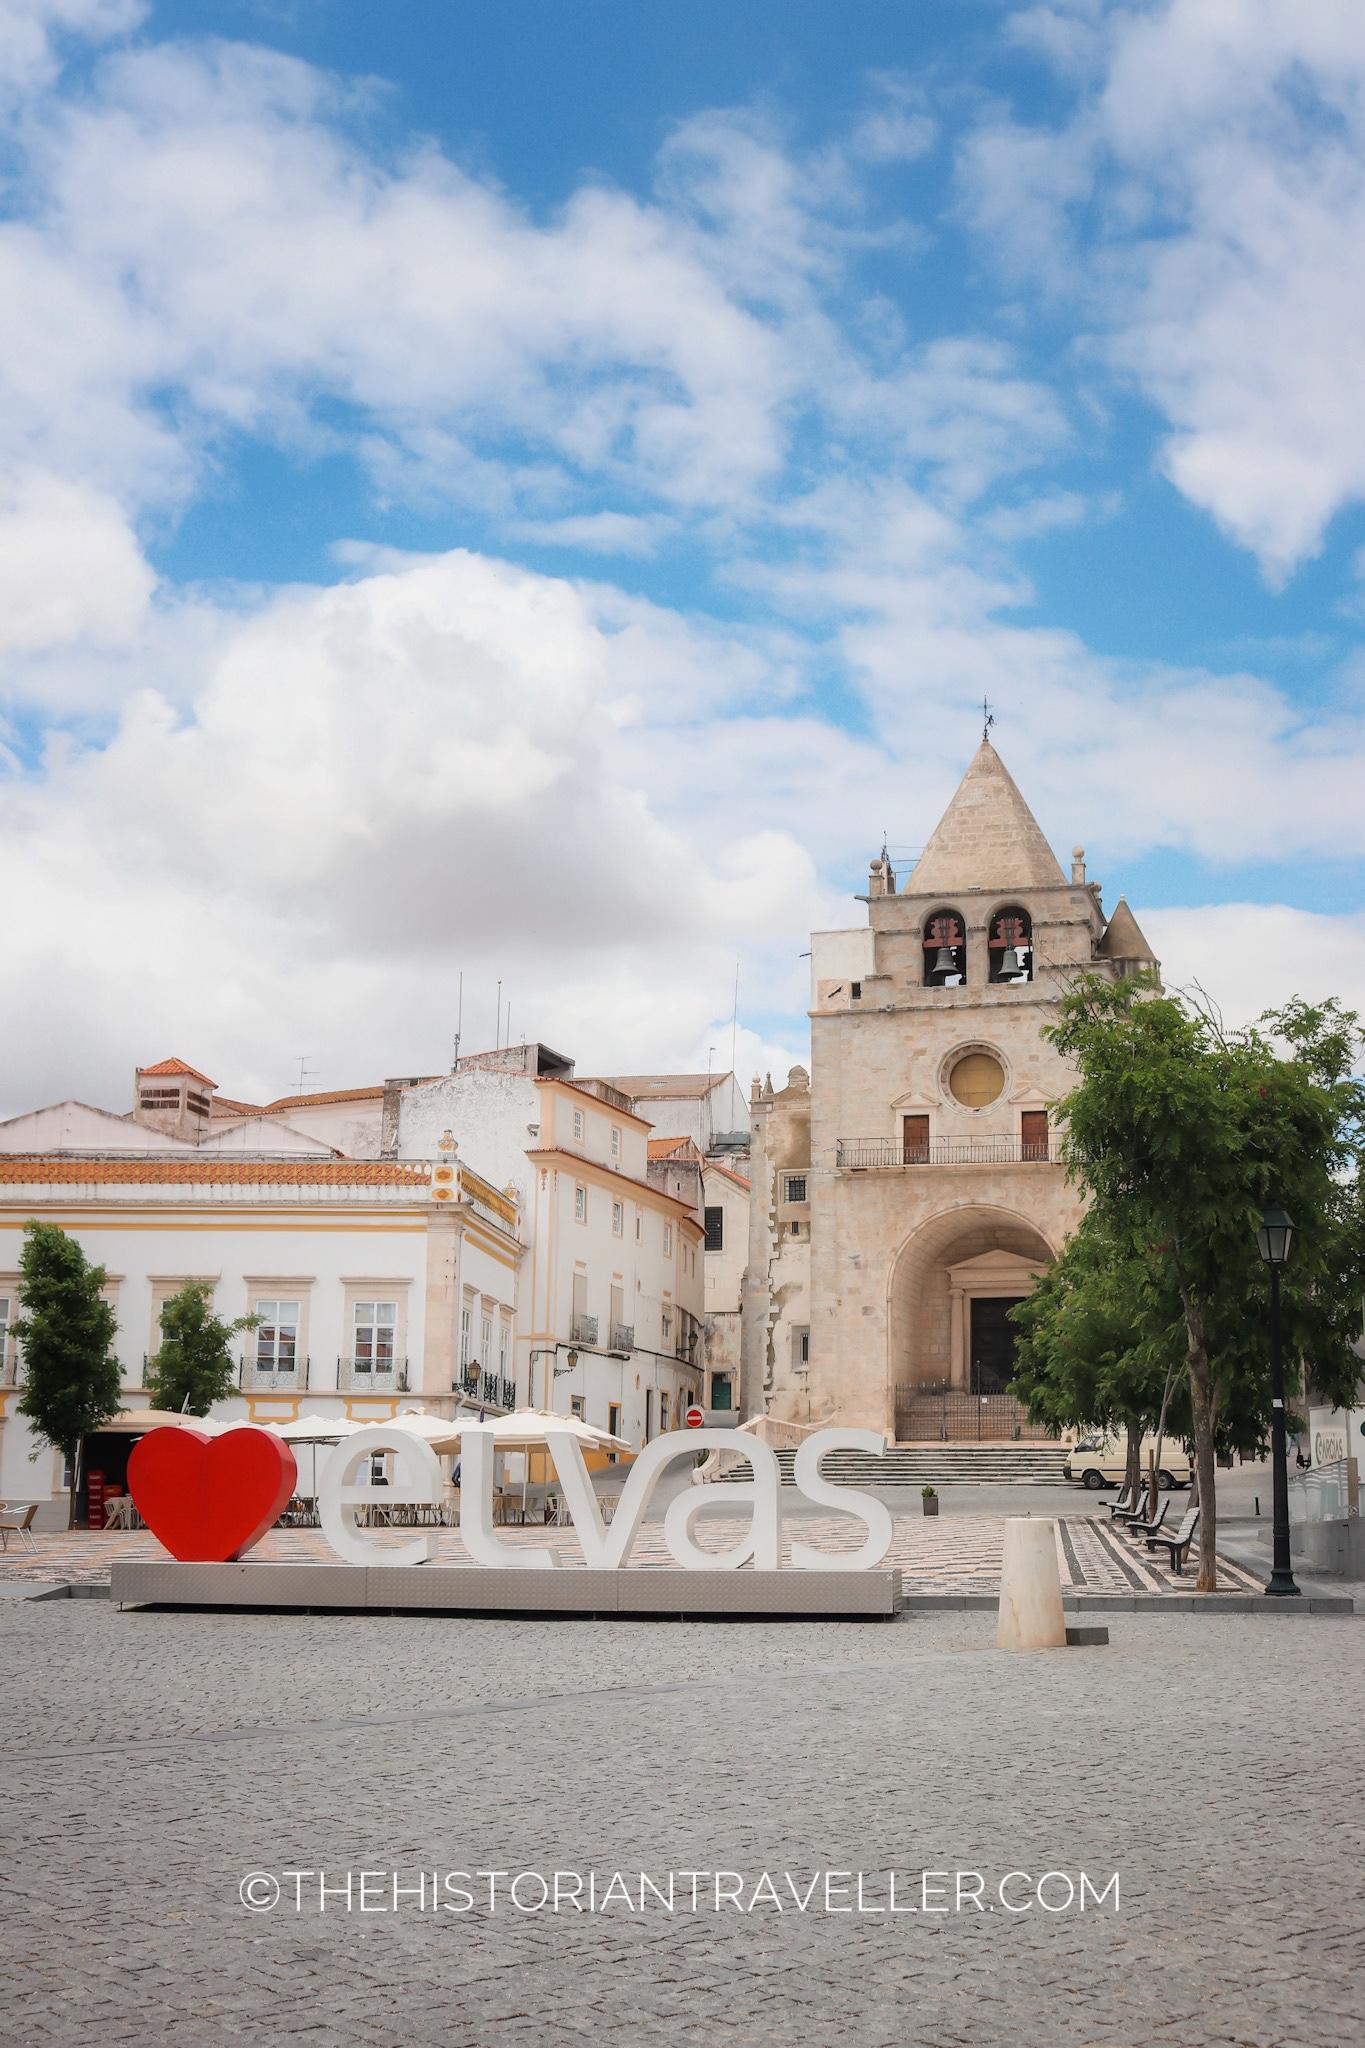 Elvas main square with the Our Lady of Assumption cathedral